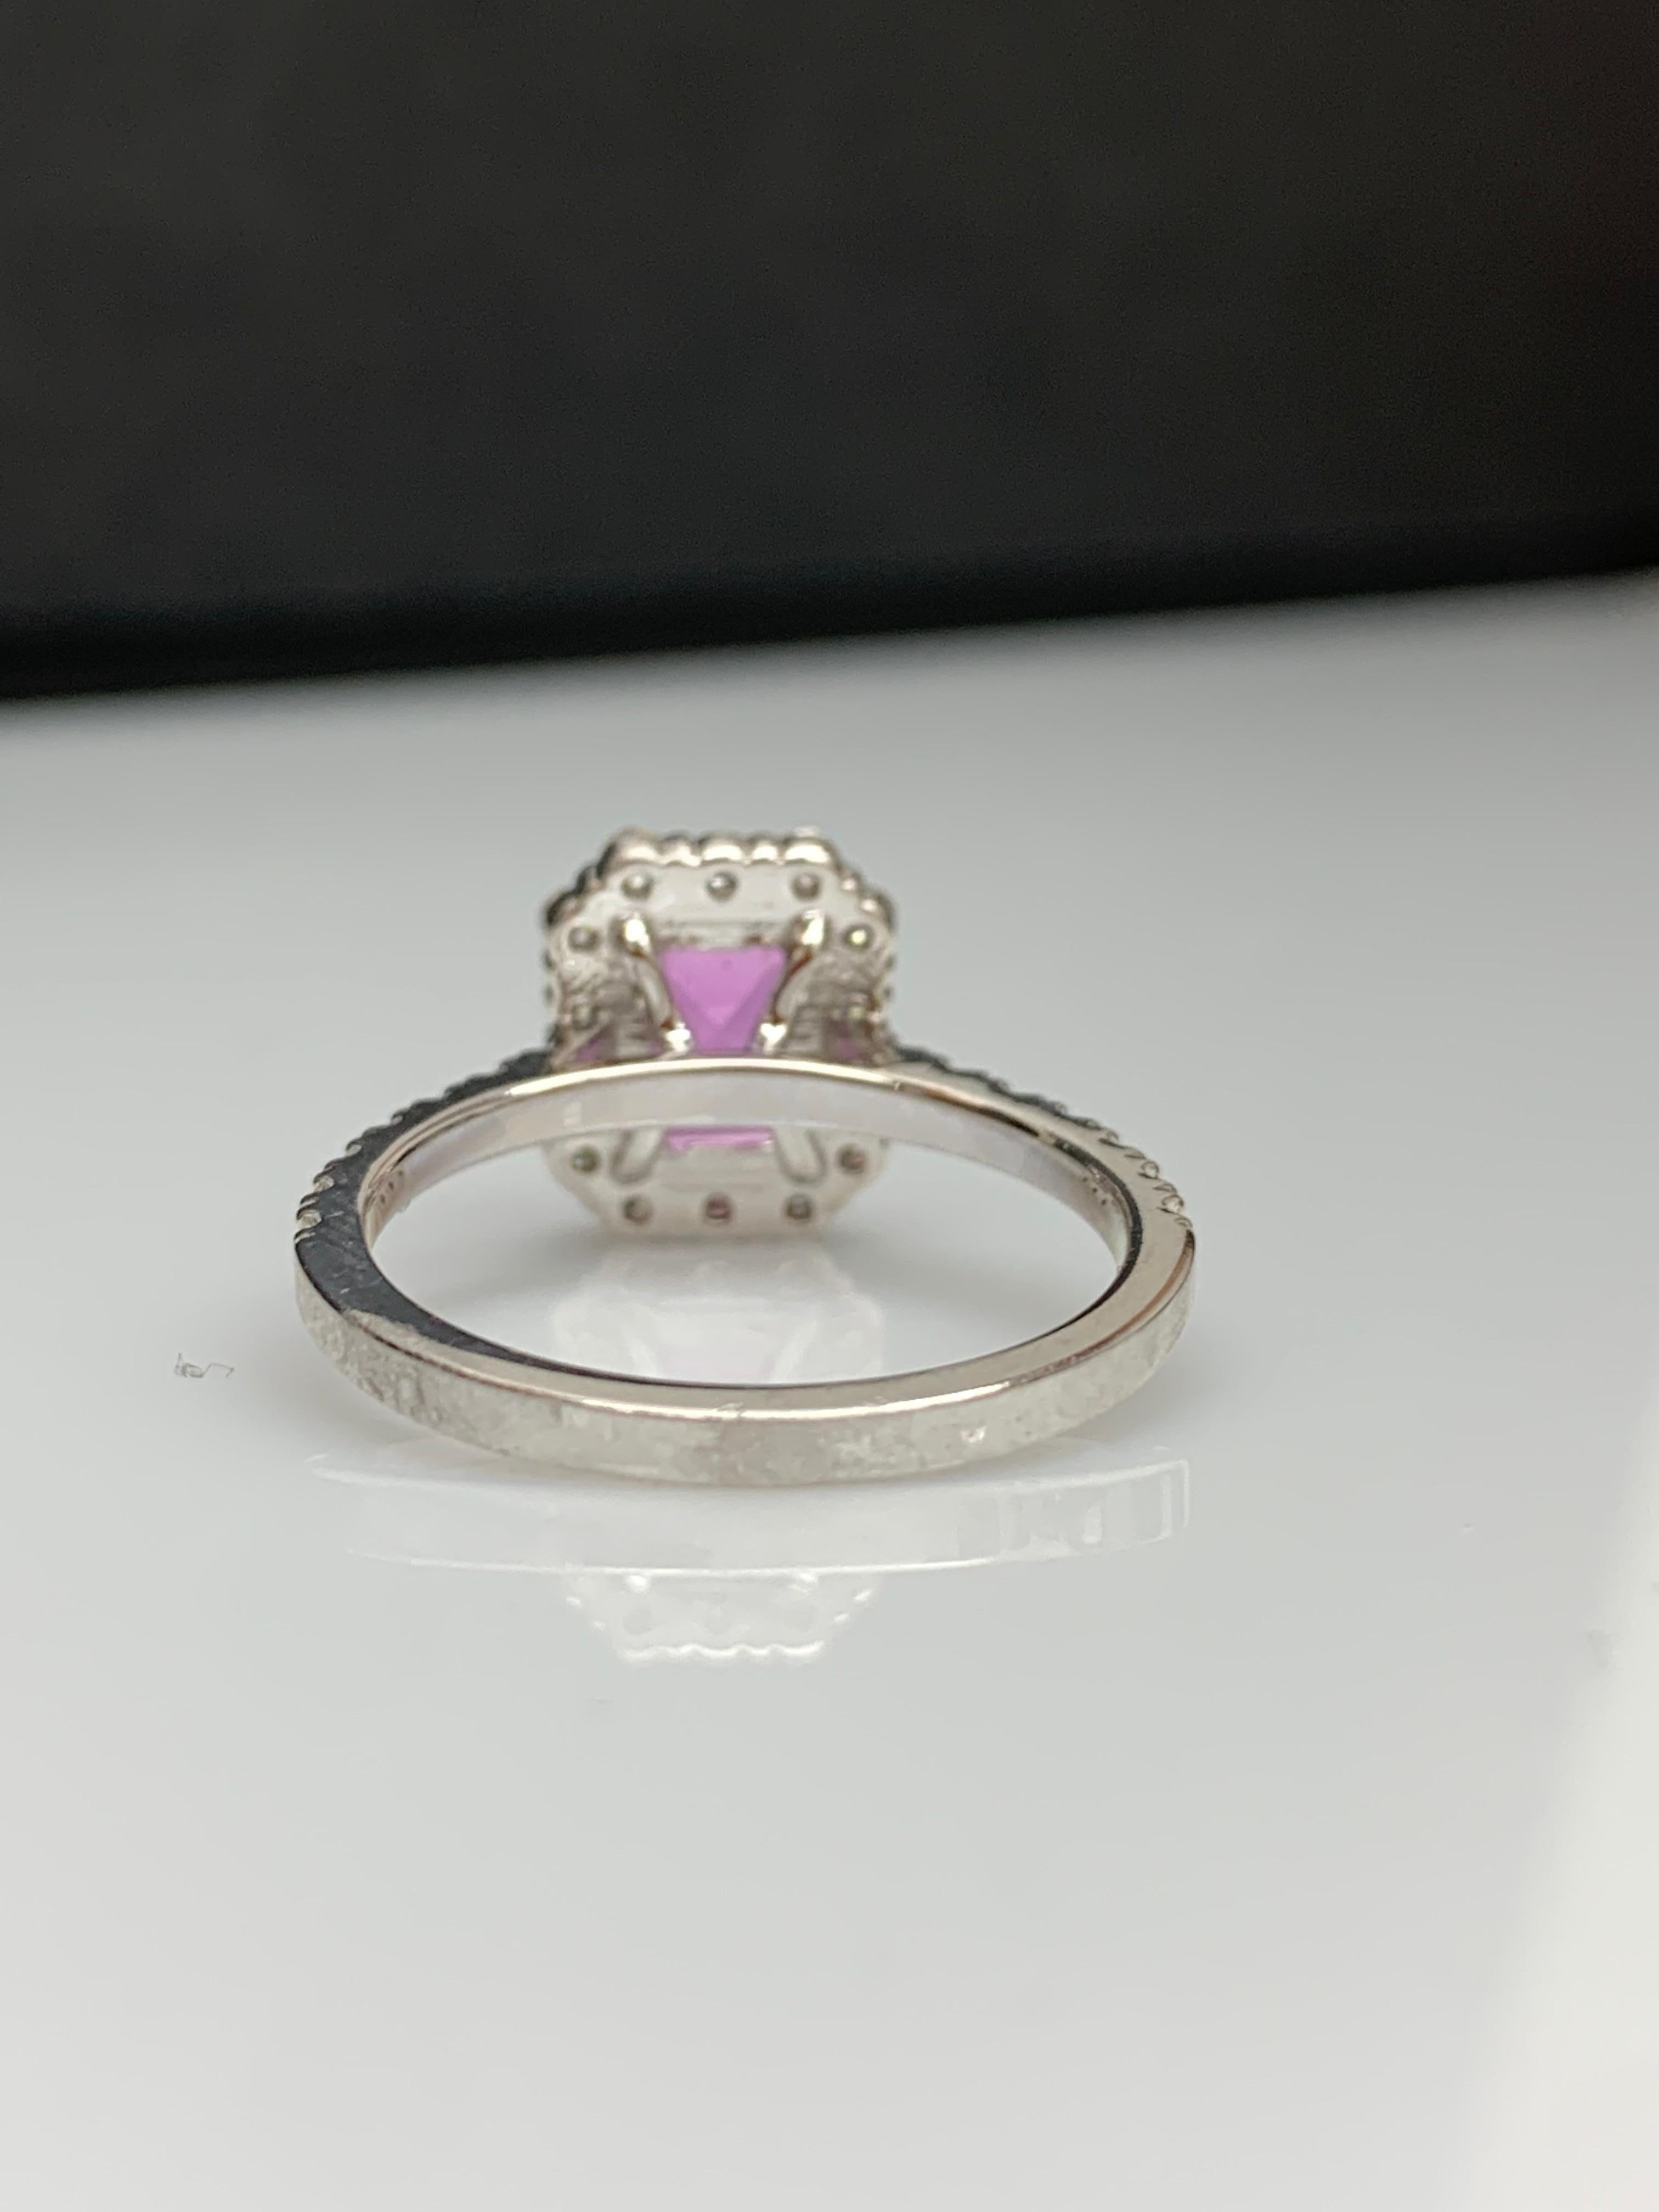 1.59 Carat Emerald Cut Pink Sapphire Diamond Engagement Ring in 14K White Gold For Sale 6